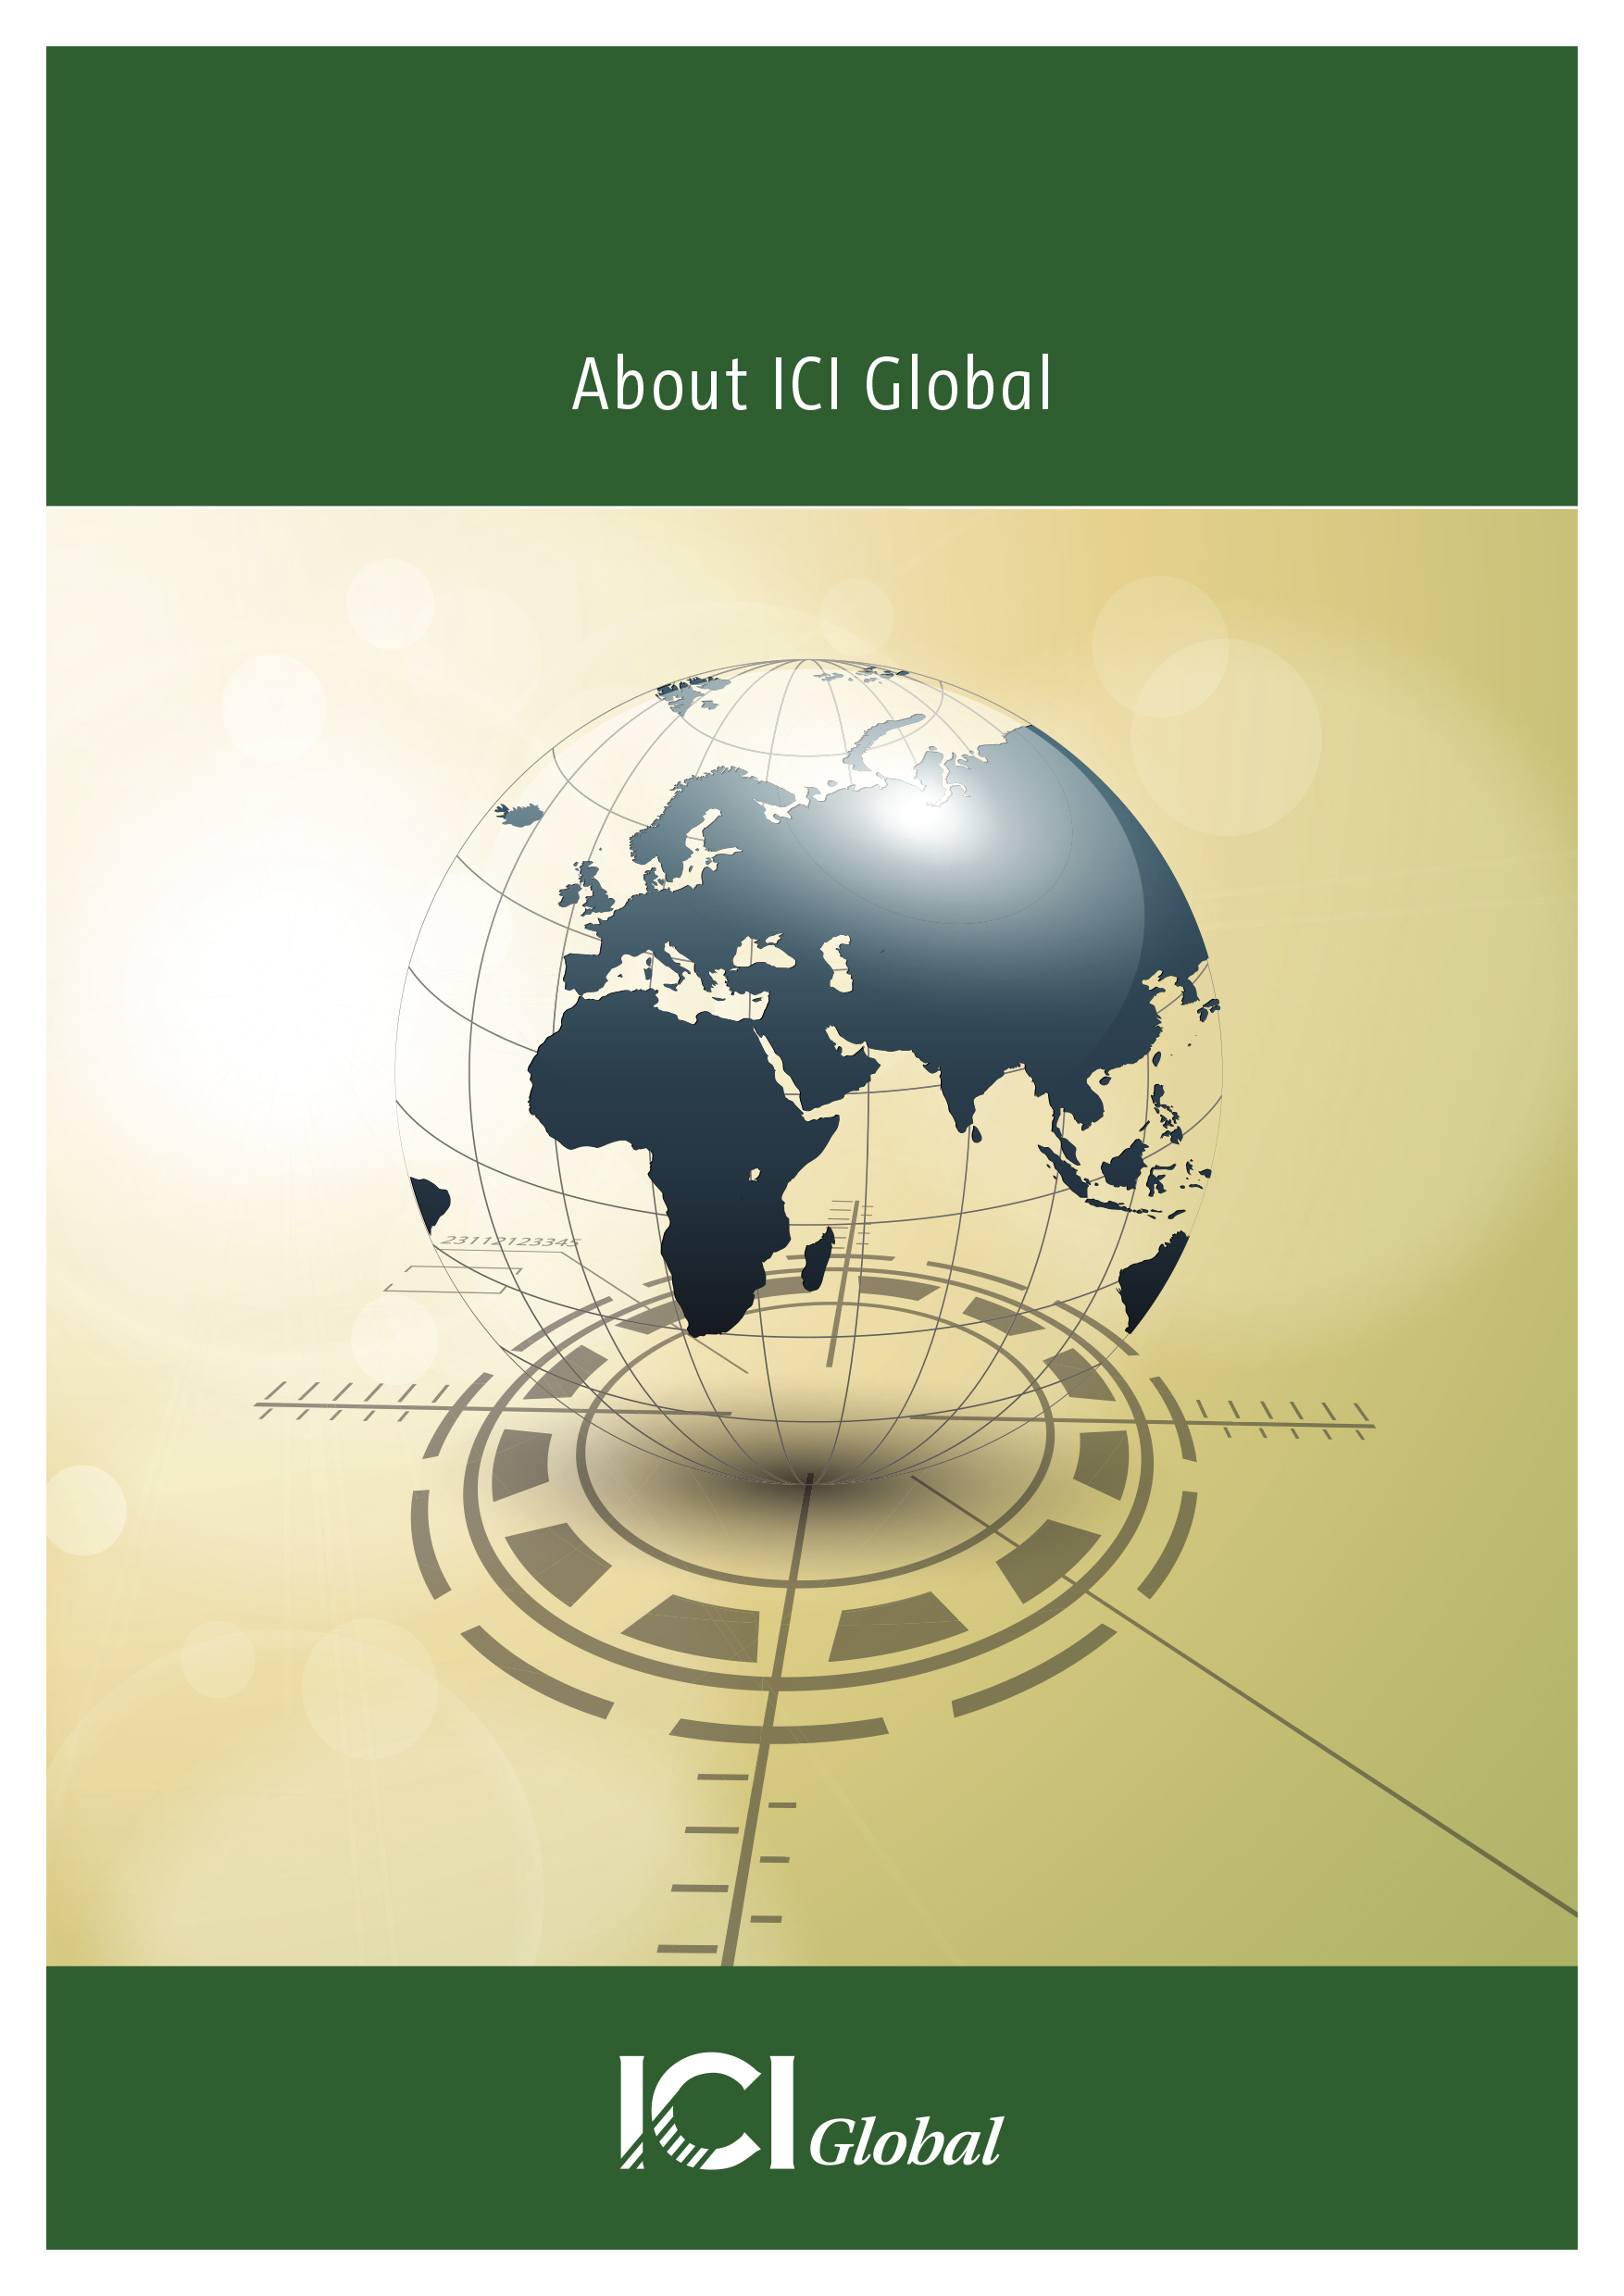 About ICI Global